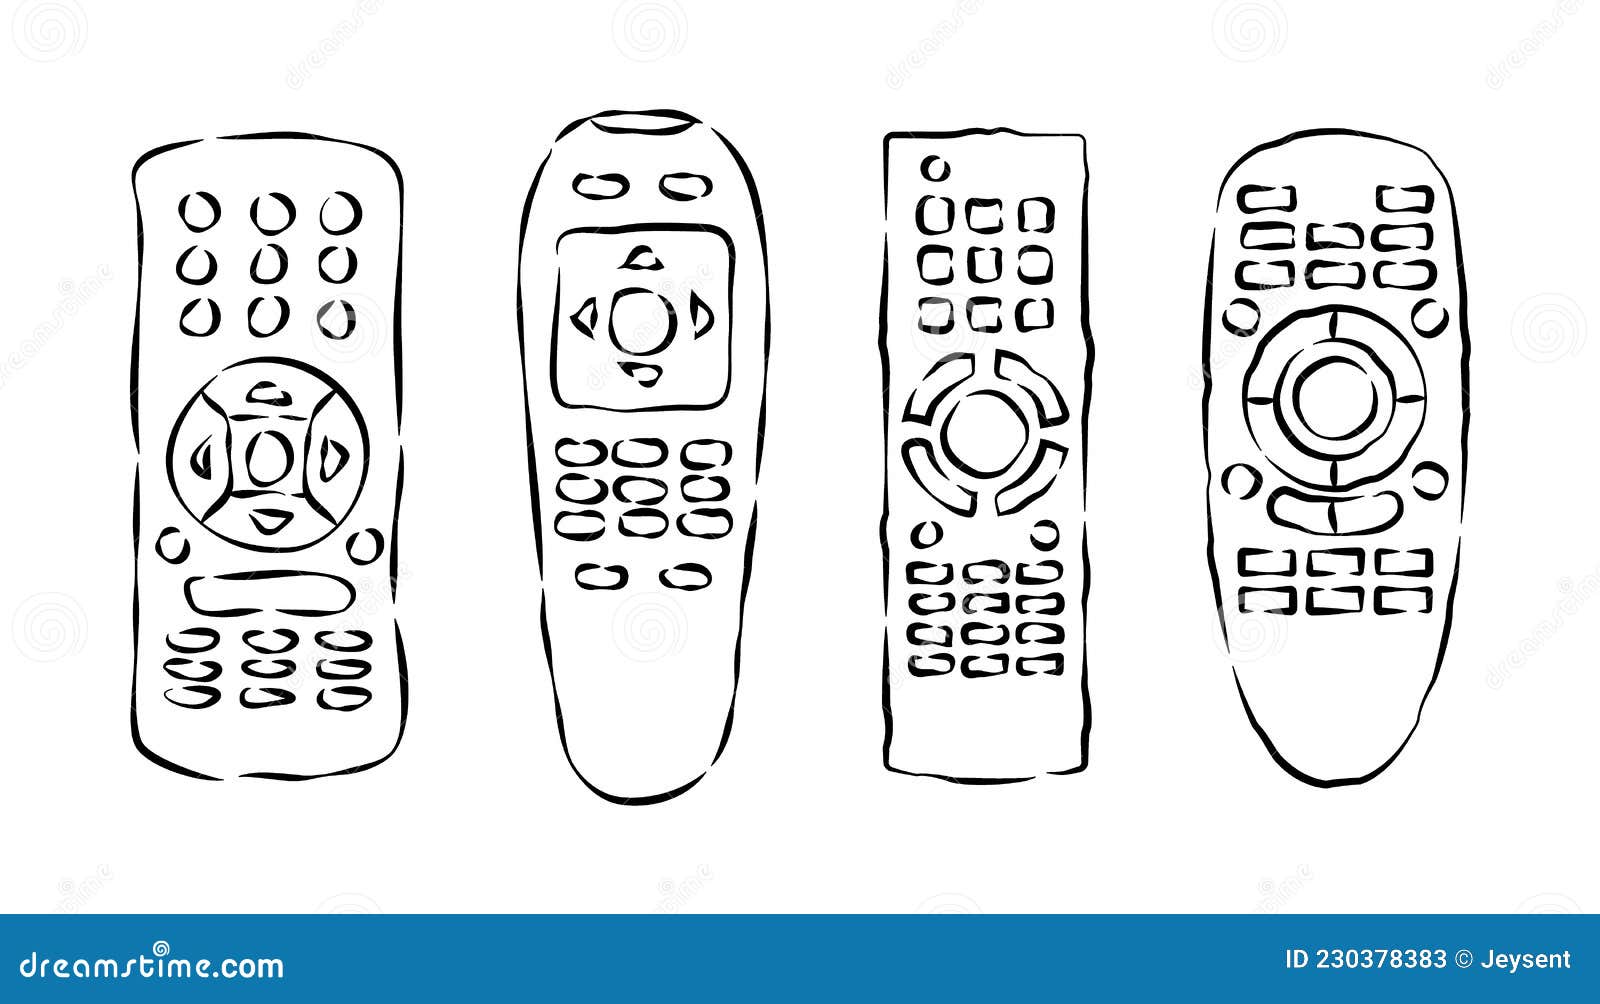 Easy Step For Kids How To Draw a Remote Control  YouTube